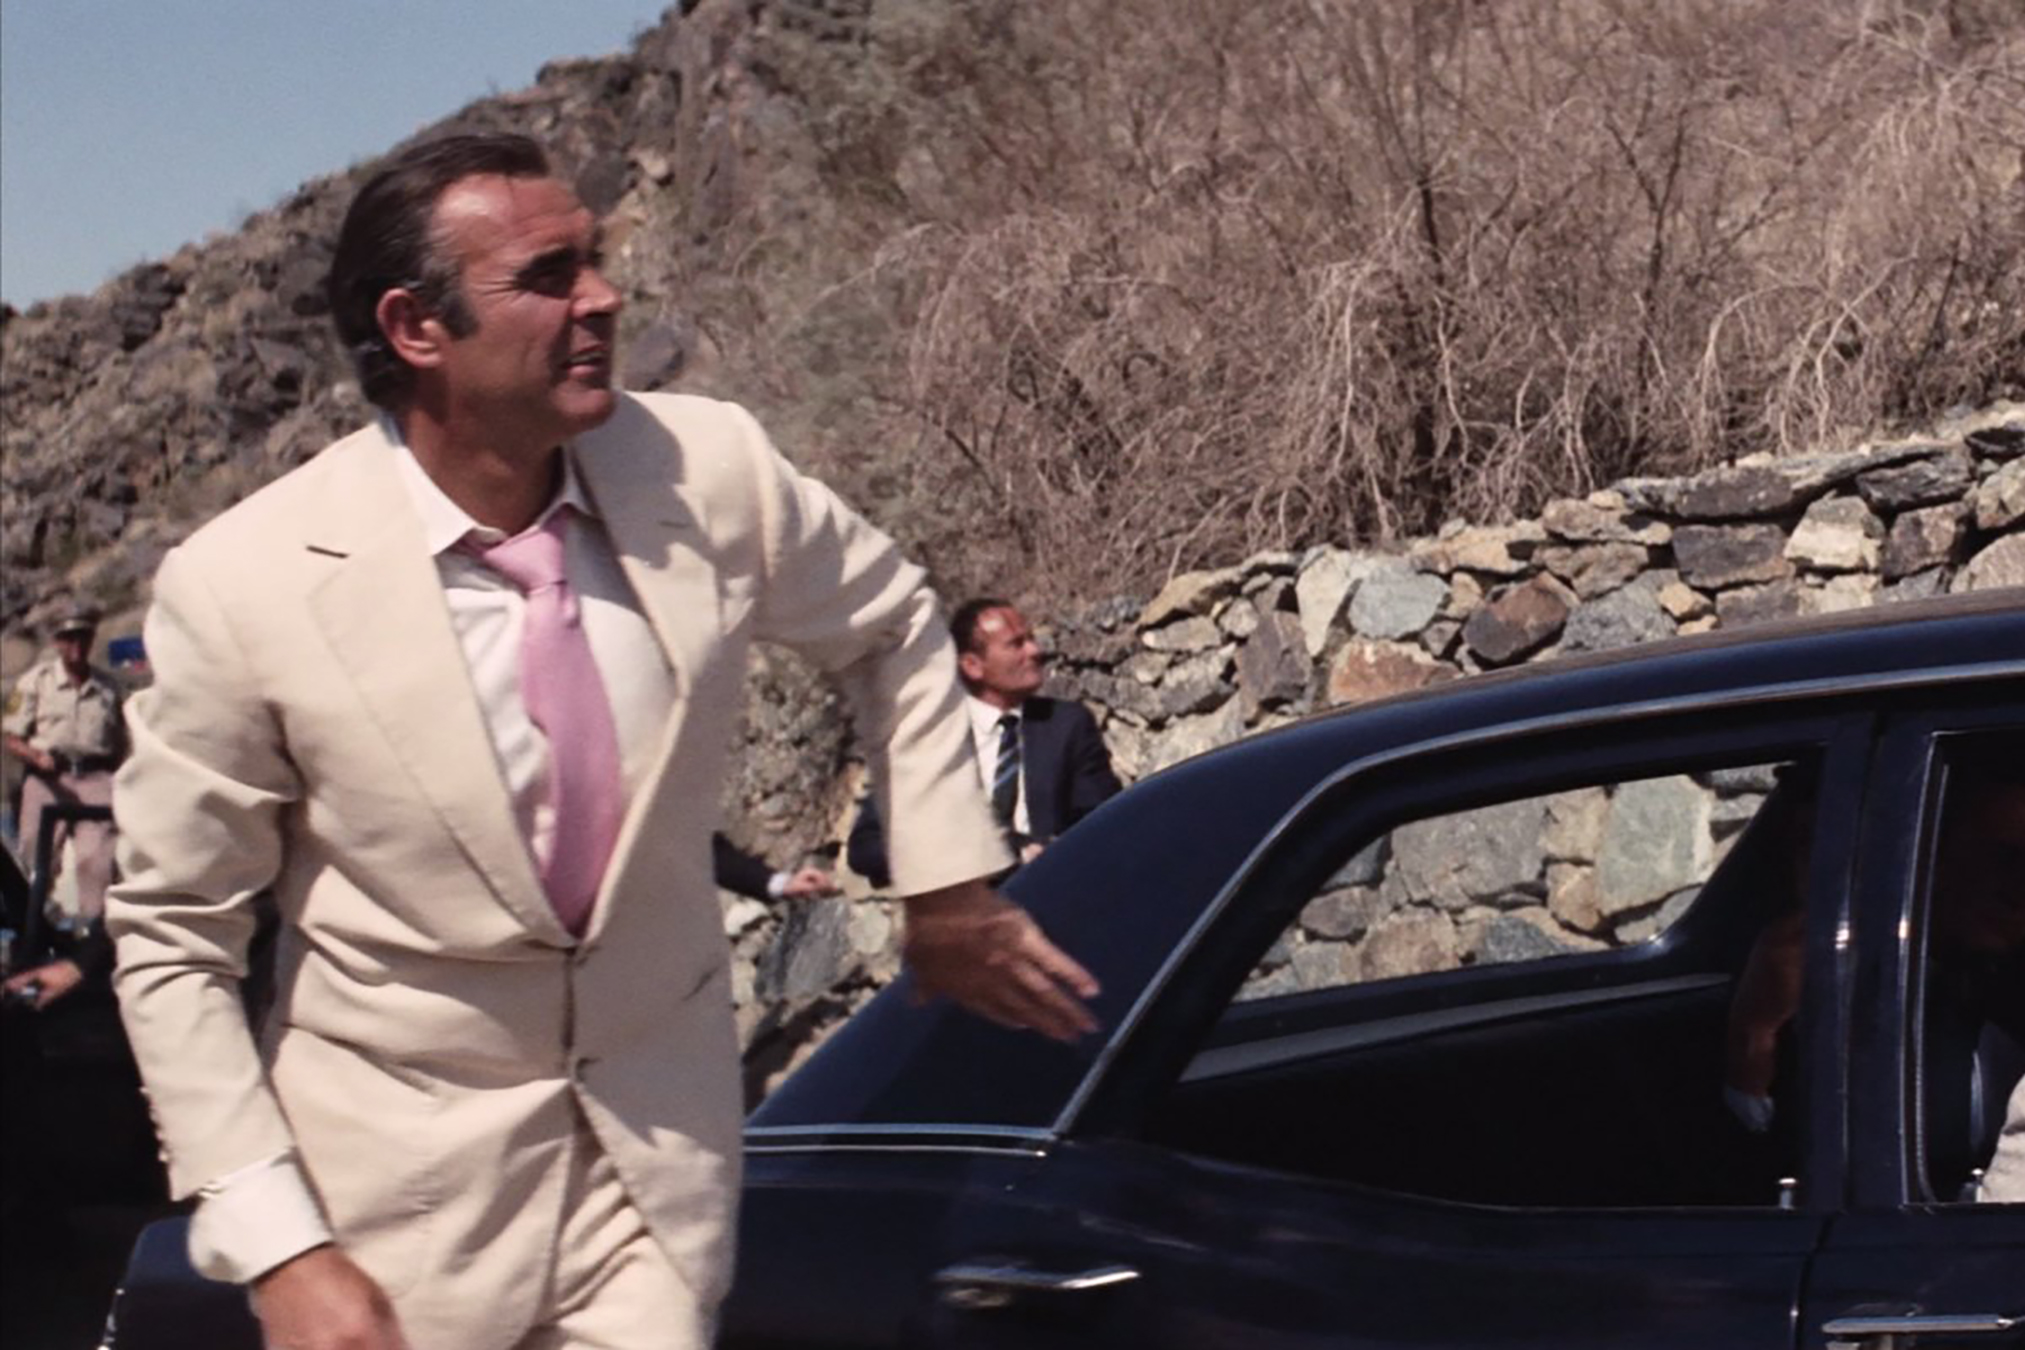 Sean Connery rocks a tan suit in Diamonds are Forever.